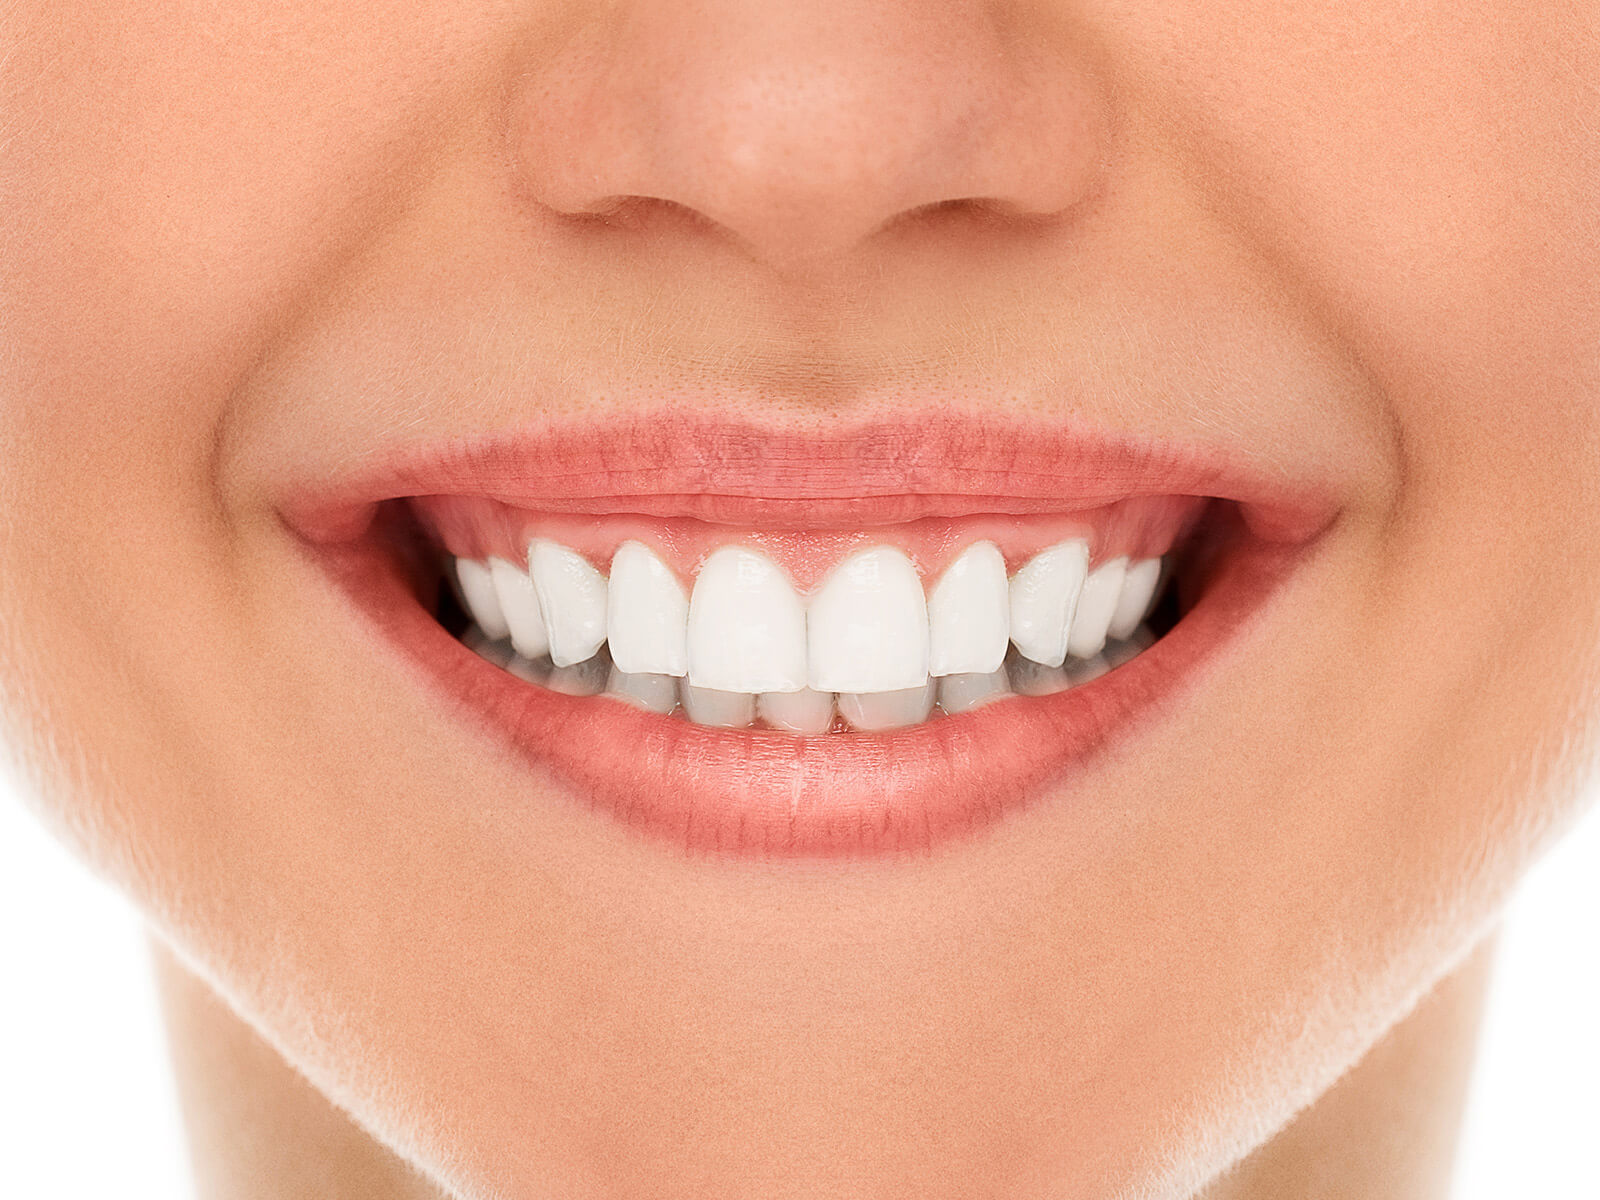 What Are The Benefits of Having Straight Teeth?